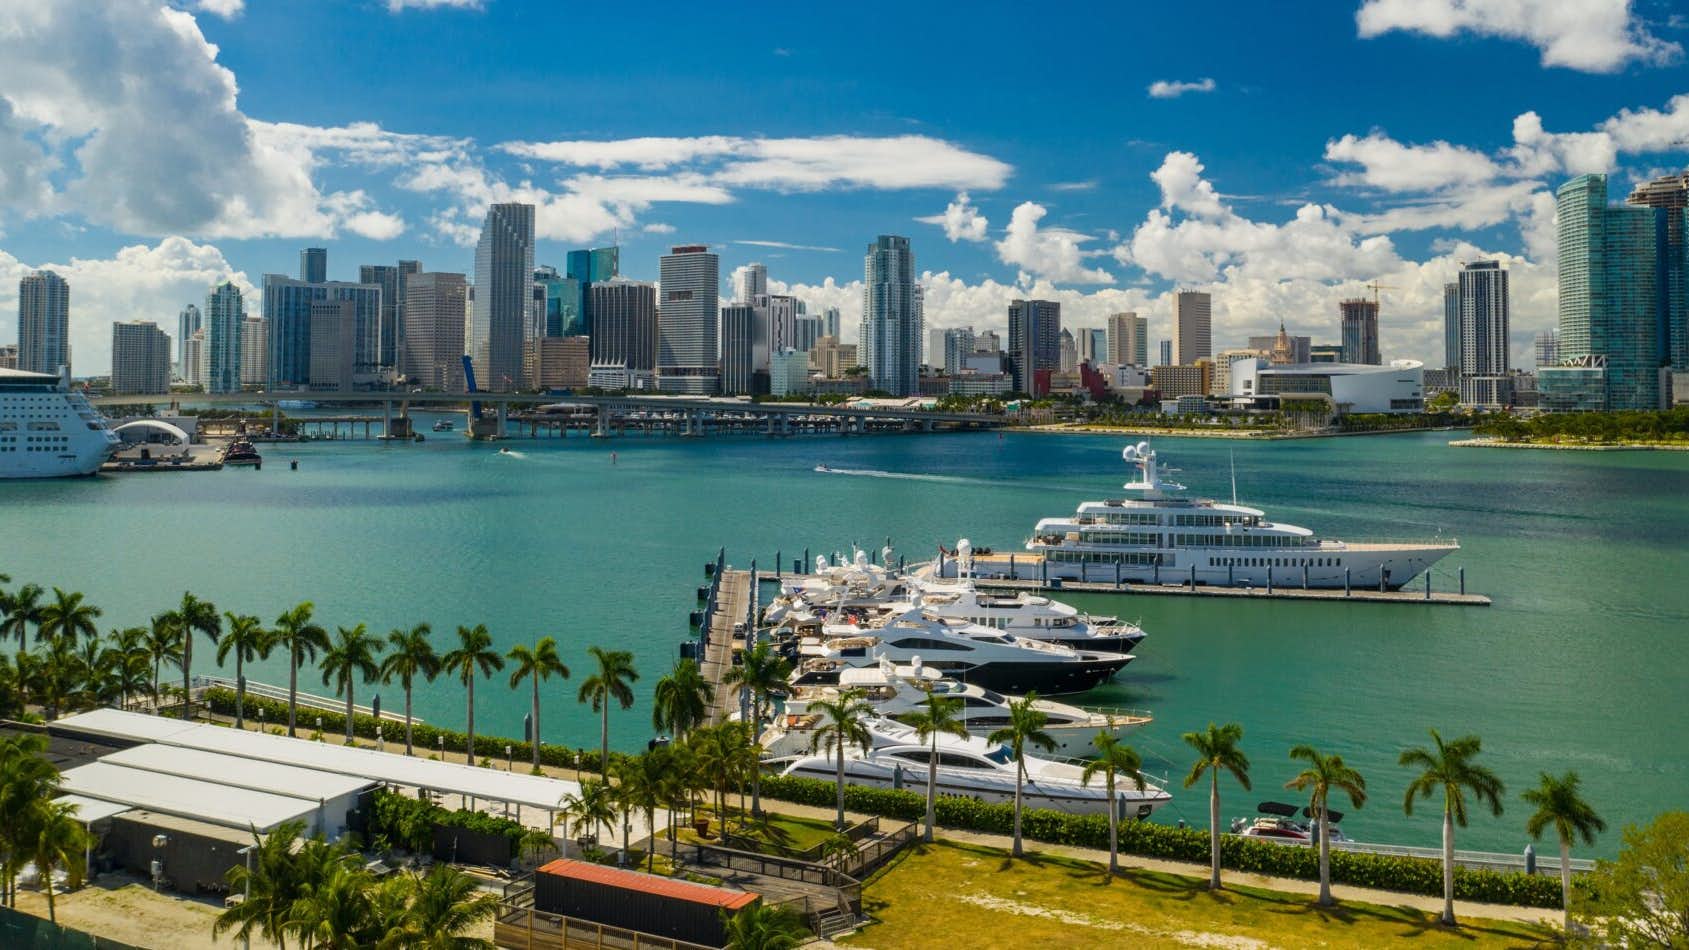 A radiant day with sunshine illuminating Miami Port, the vibrant setting of the Miami International Boat Show.